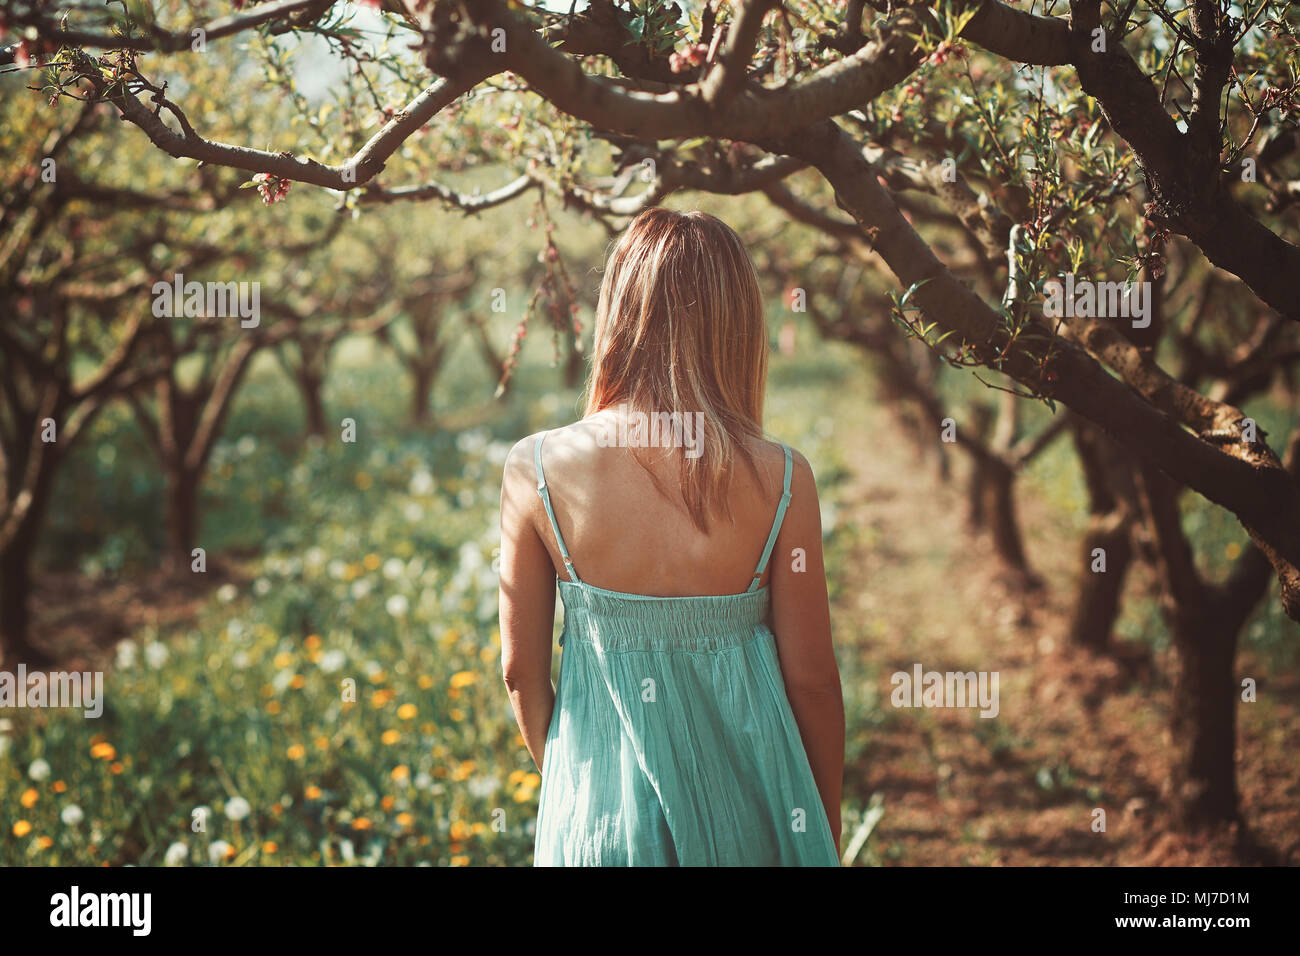 Woman alone in a orchard. Peace and serenity Stock Photo